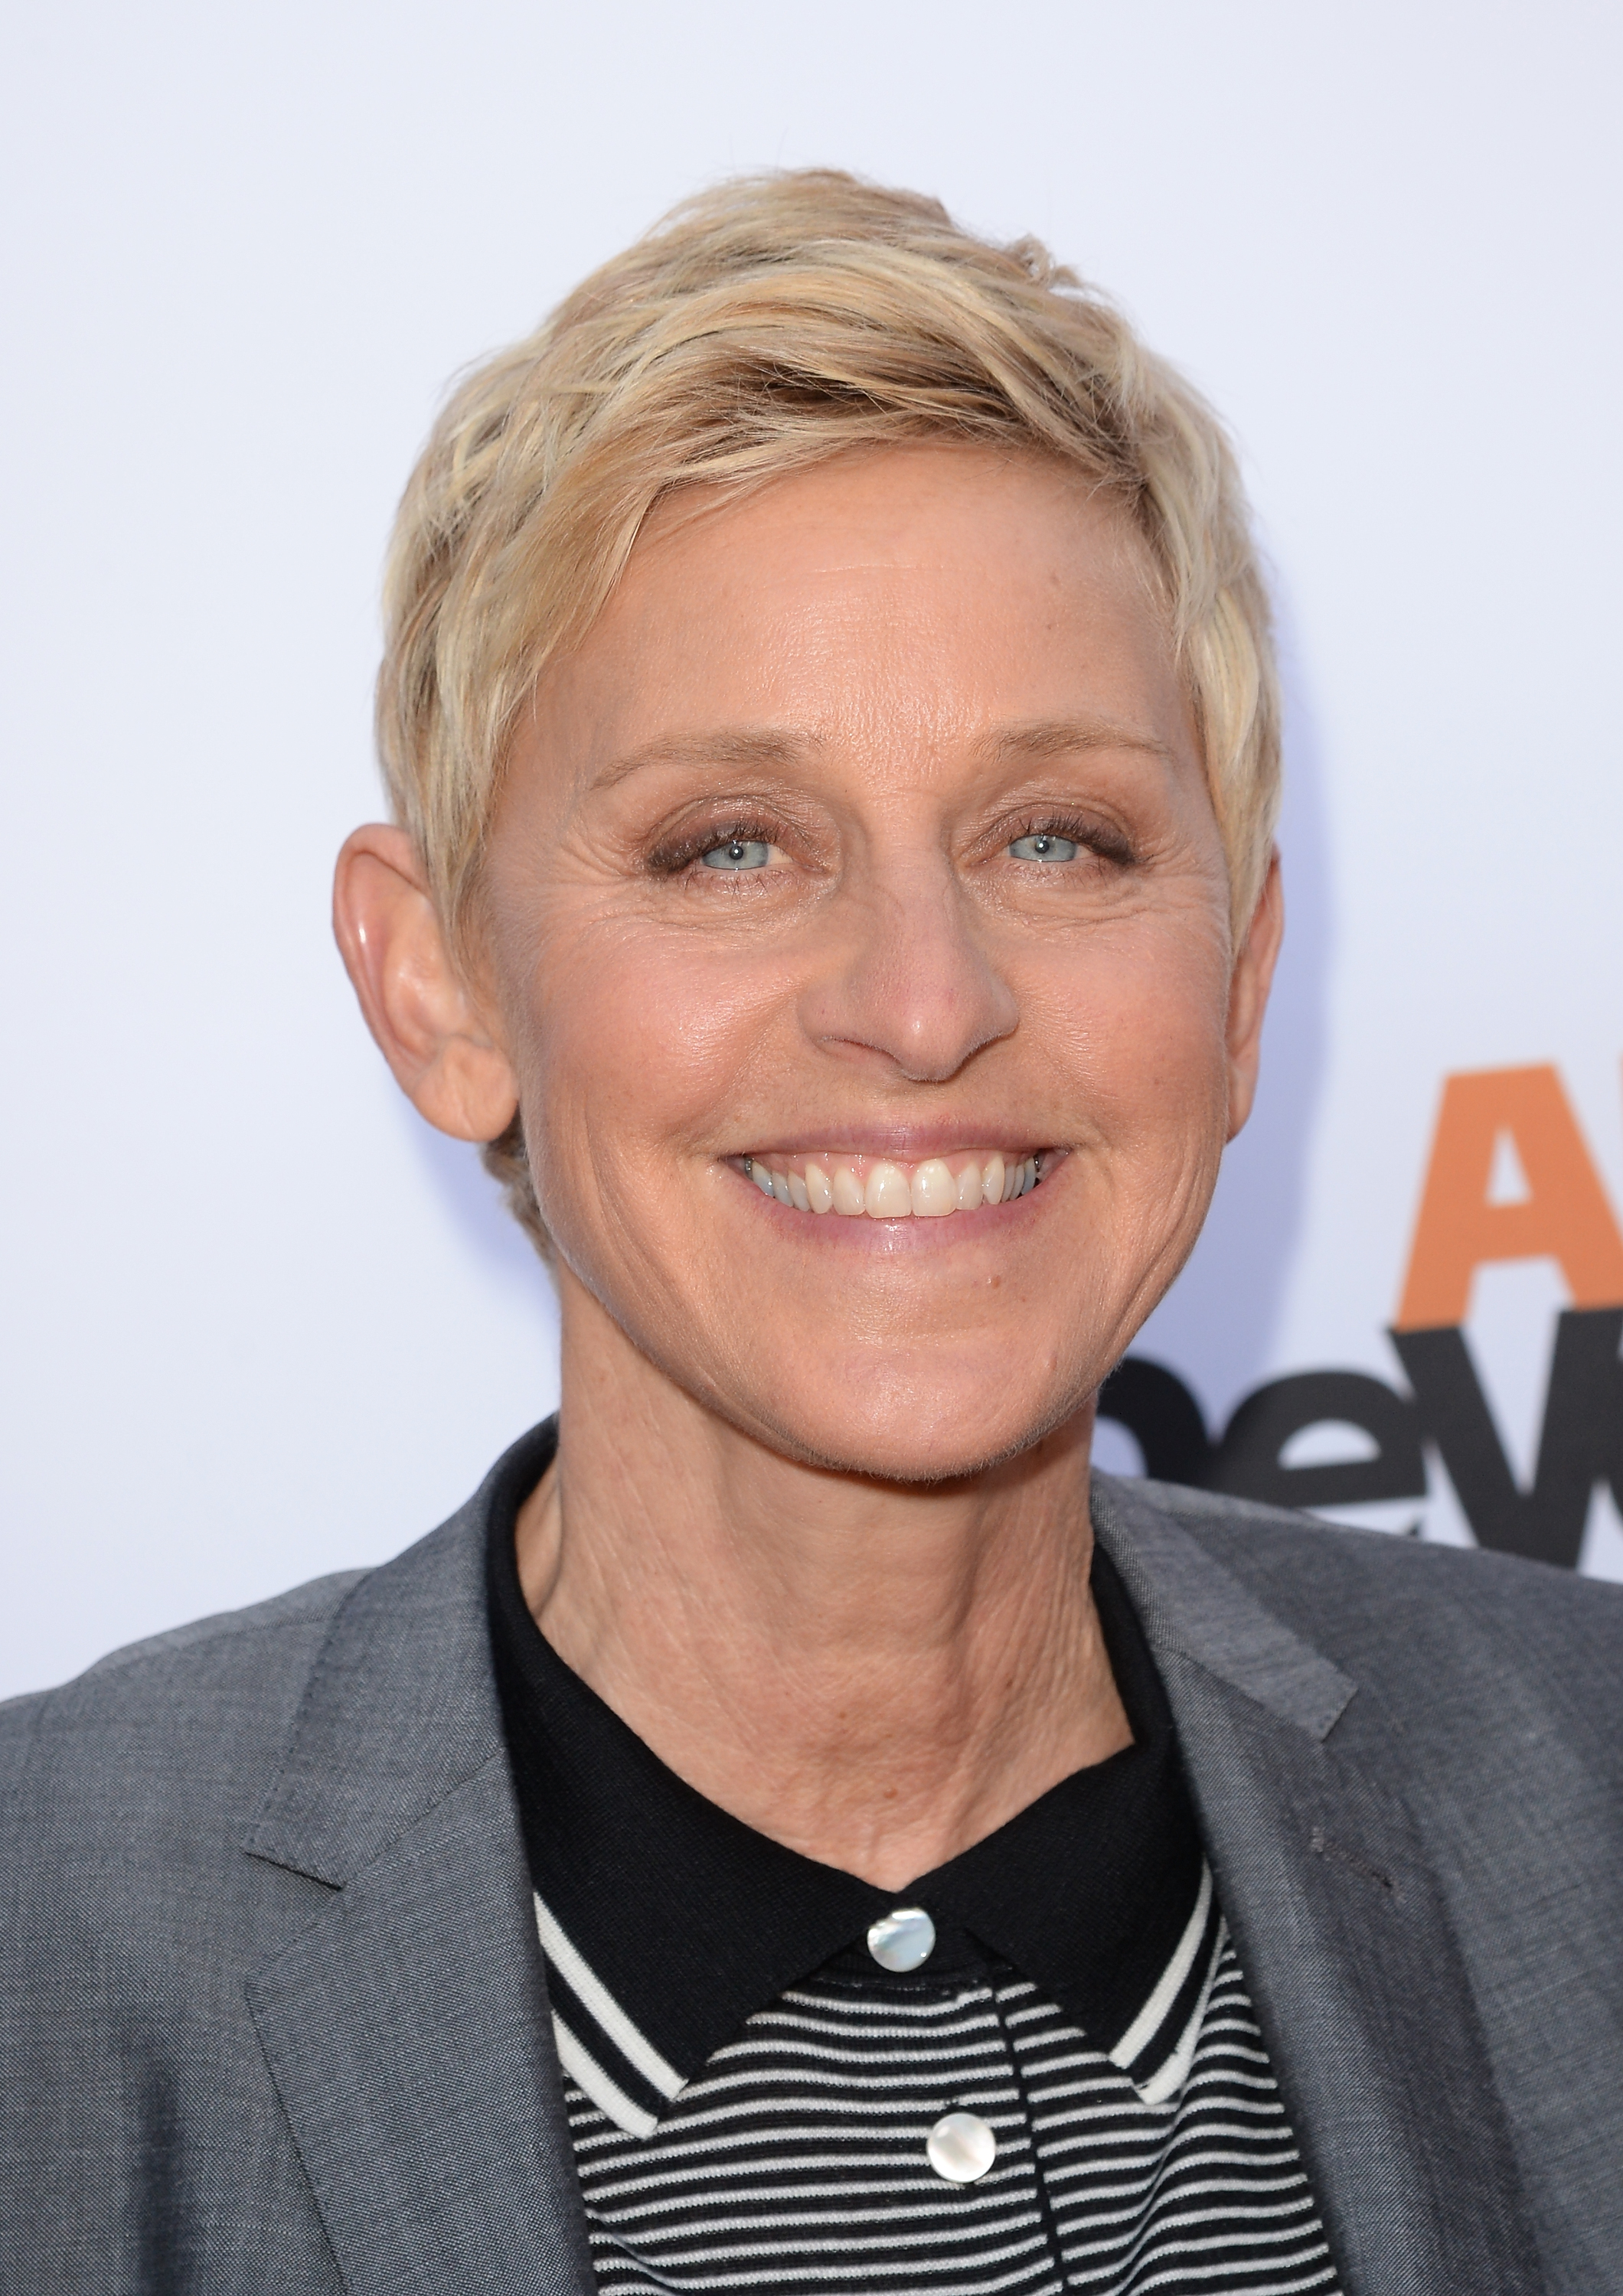 TV personality Ellen DeGeneres arrives at the TCL Chinese Theatre for the premiere of Netflix's "Arrested Development" Season 4 held on April 29, 2013 in Hollywood, California.